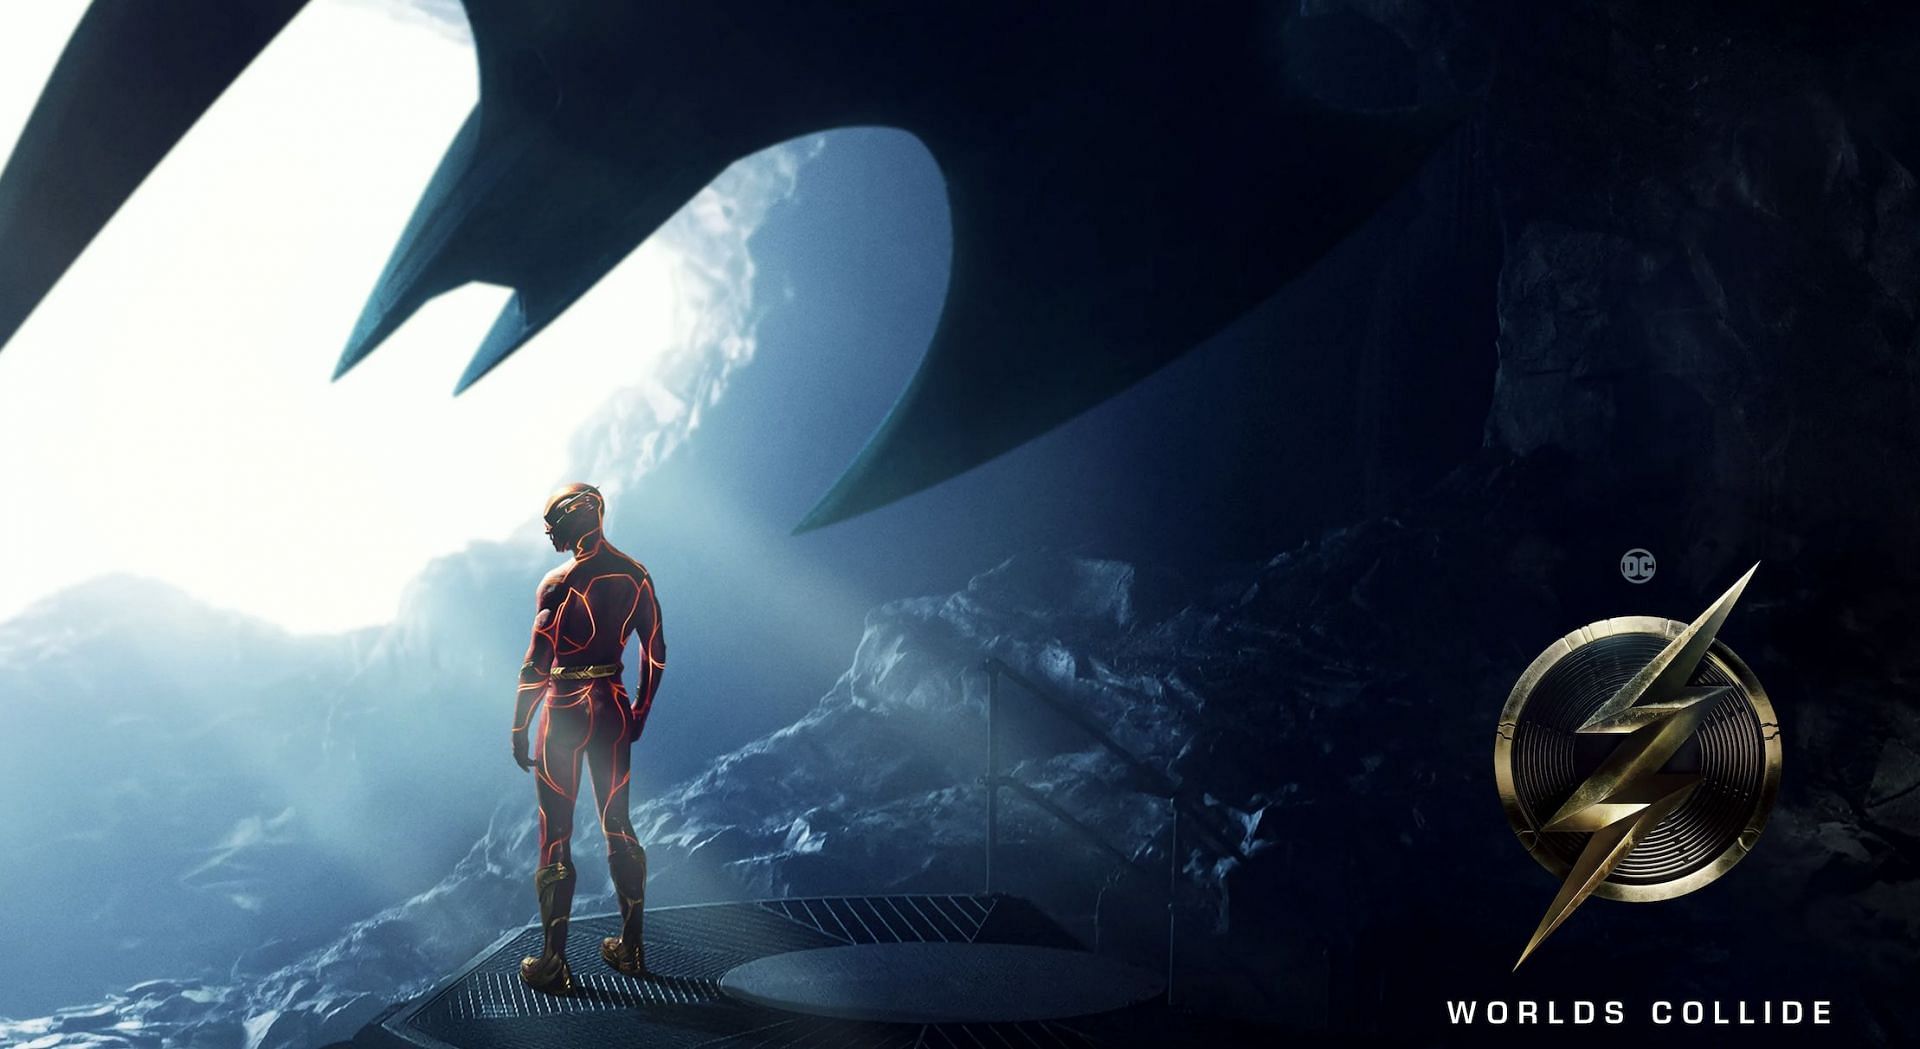 Mixed emotions: Fans react to the teaser poster for the movie (Image via DC Studios)